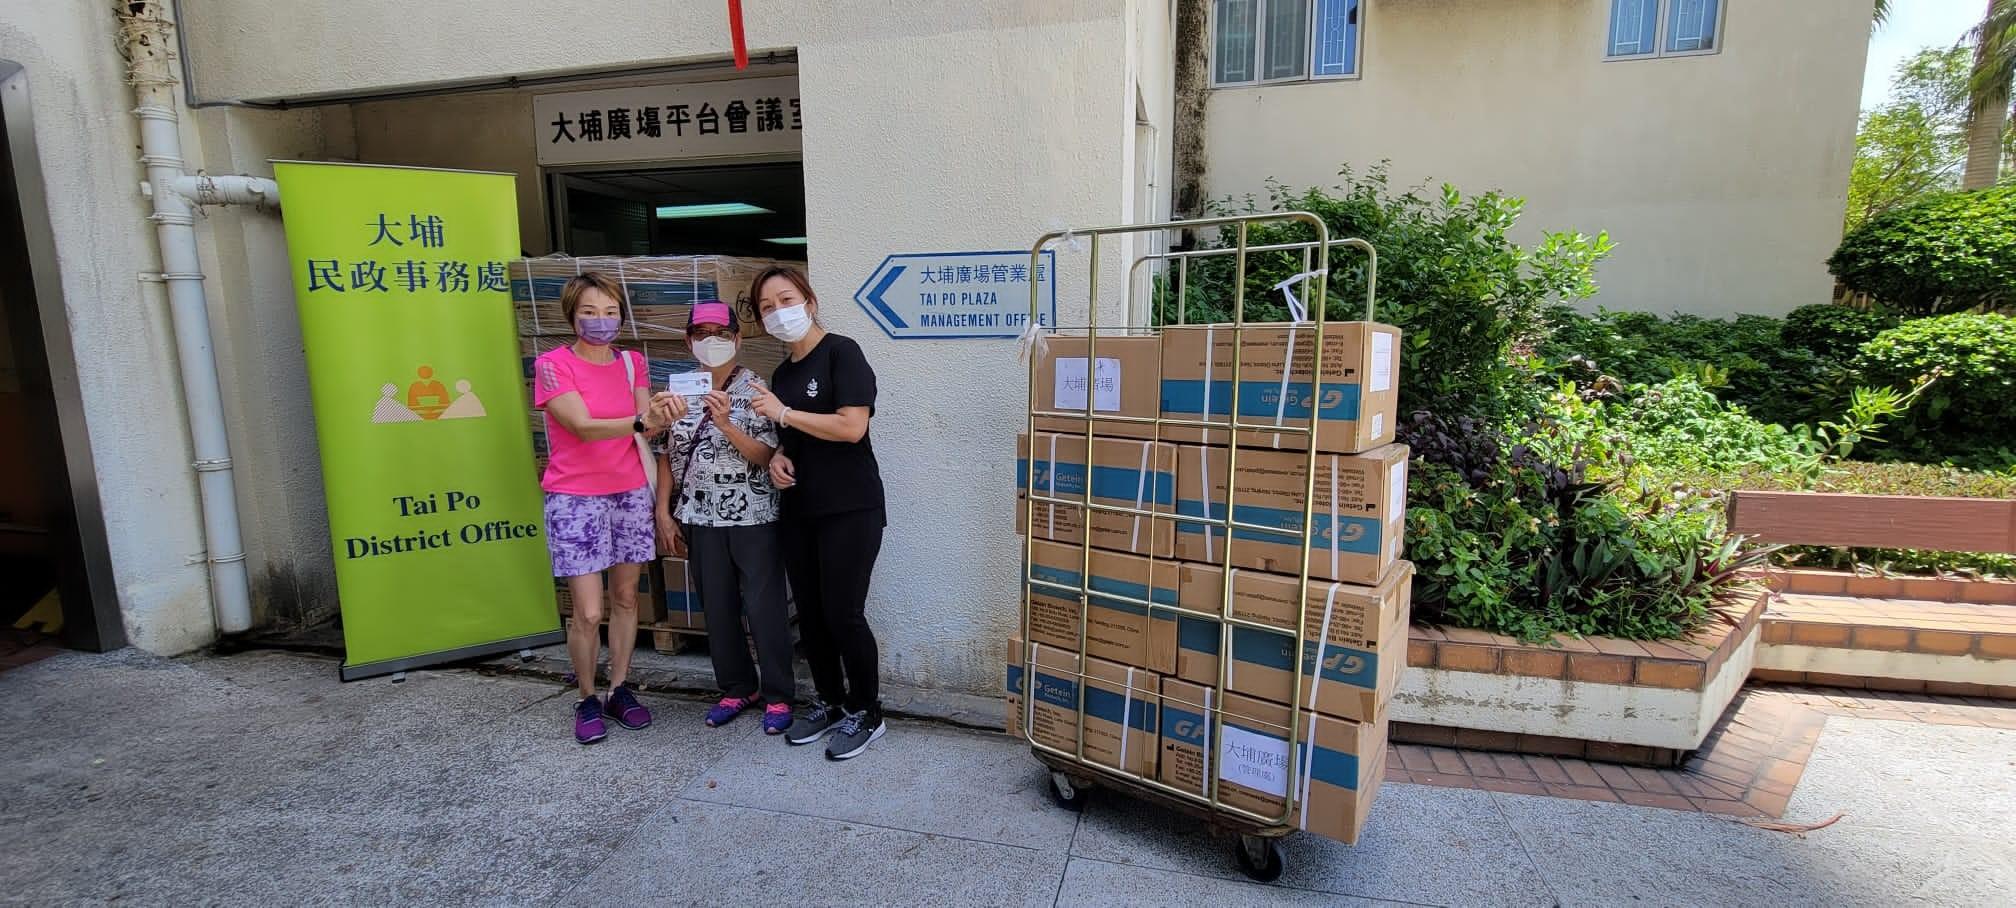 The Tai Po District Office today (July 16) distributed COVID-19 rapid test kits to households, cleansing workers and property management staff living and working in Tai Po Plaza for voluntary testing through the property management company.